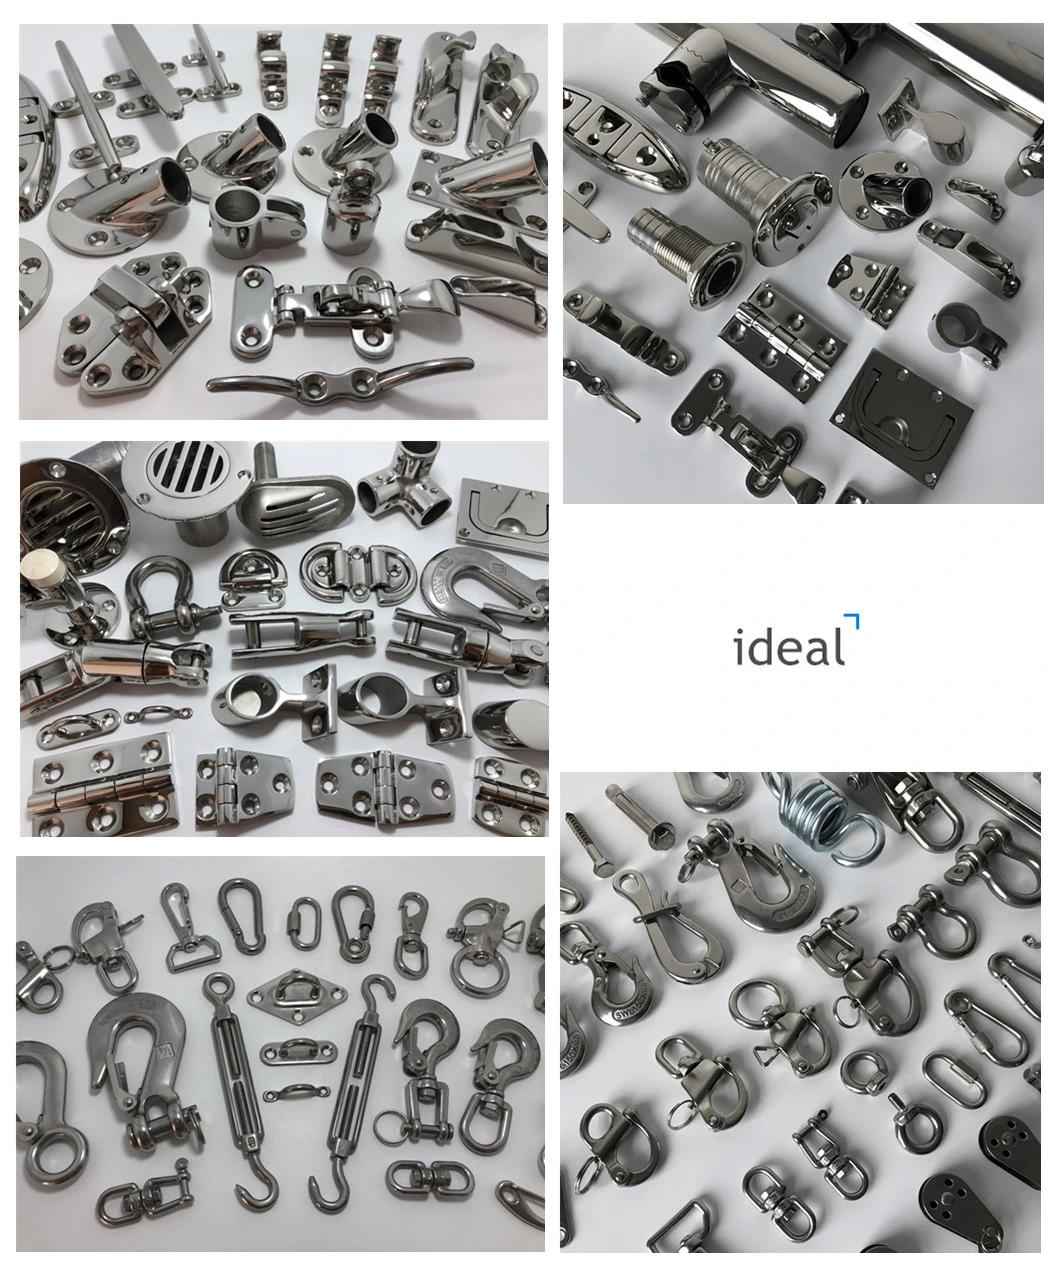 China Metal Parts Fabrication Company Precision Investment Castings